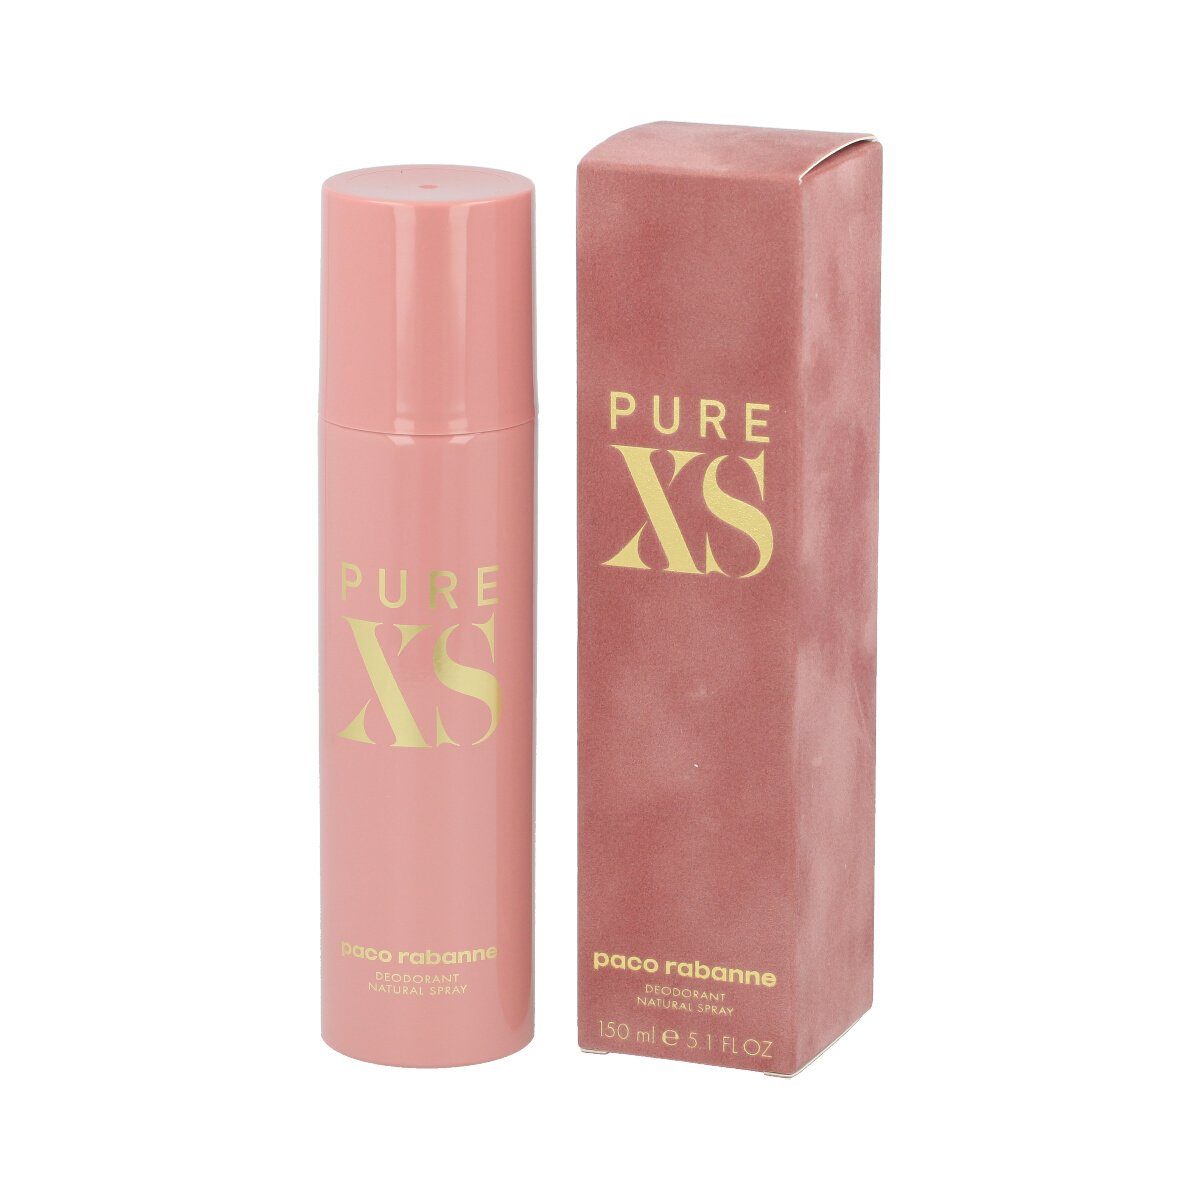 paco rabanne Körperspray Pure XS Her for